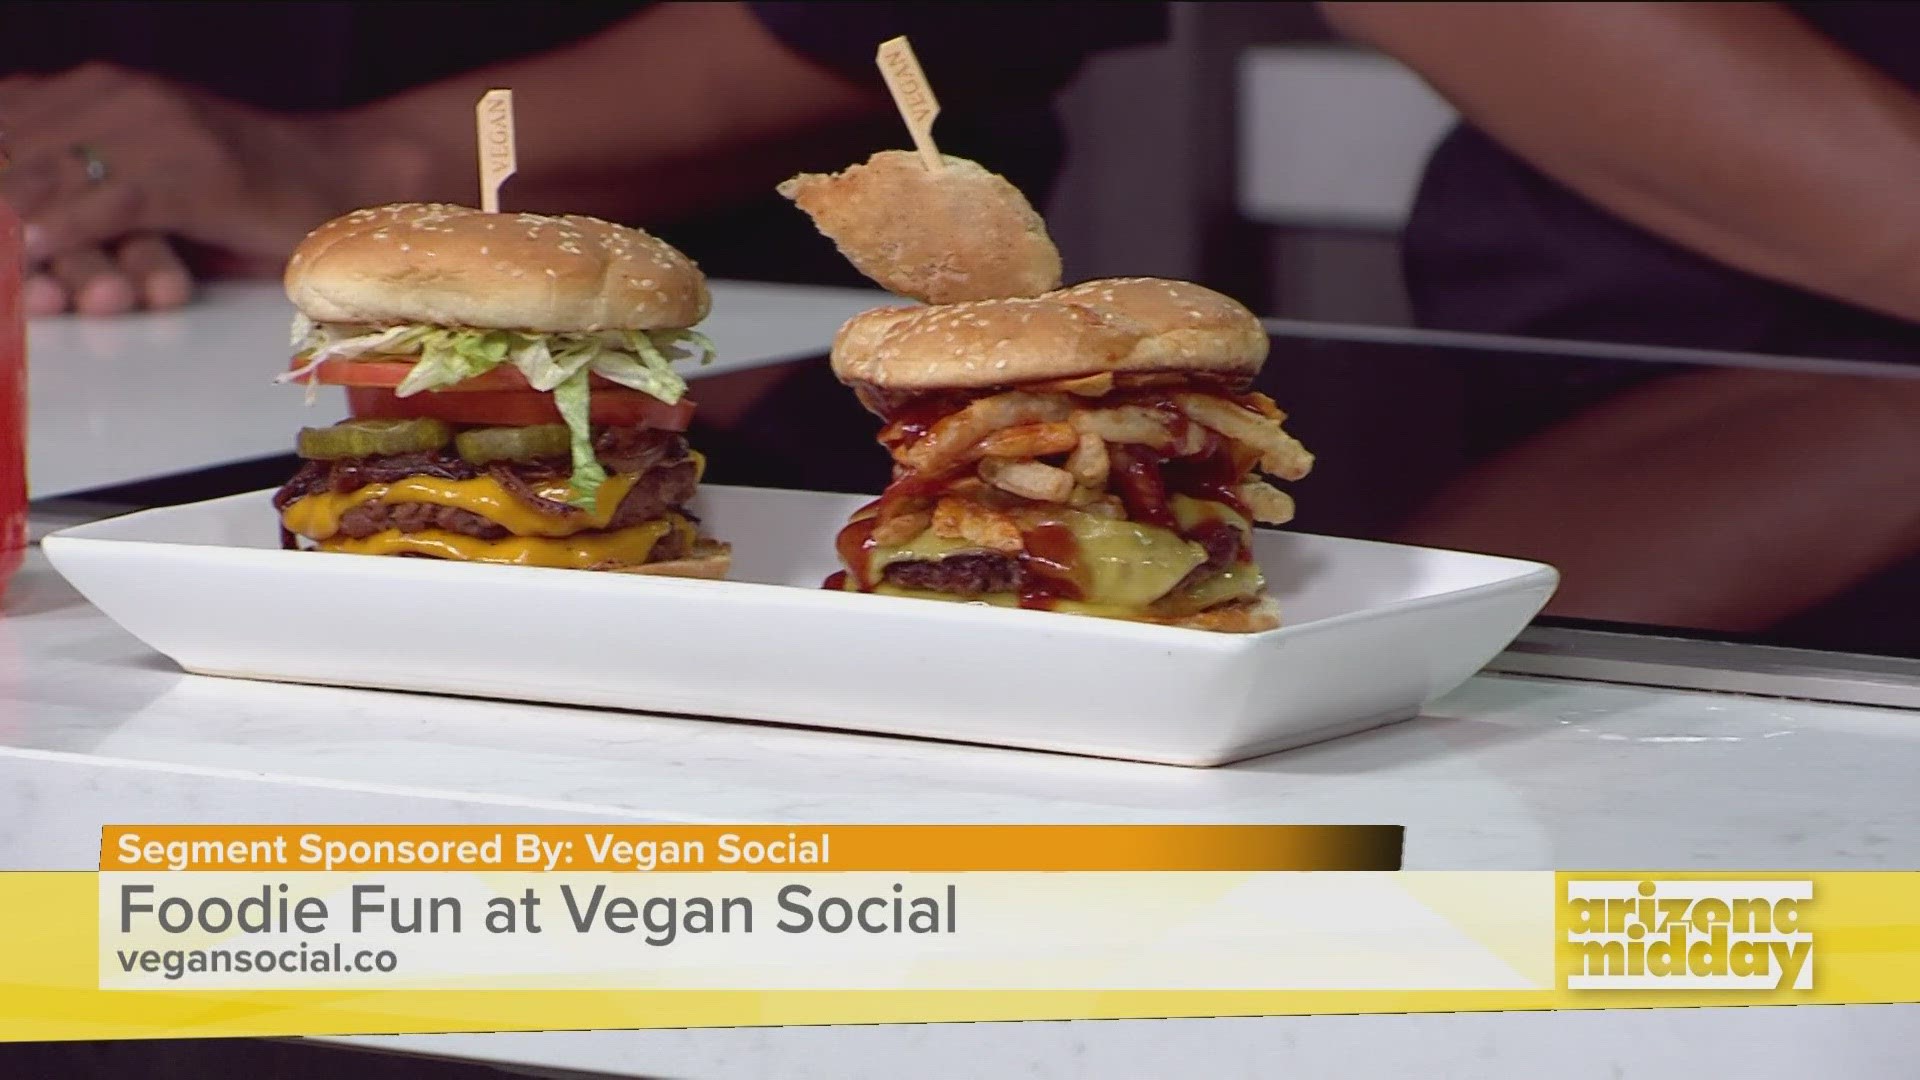 Naughty Vegan shares some of the delicious eats you'll be able to find at the weekly Vegan Social kicking off this Saturday!